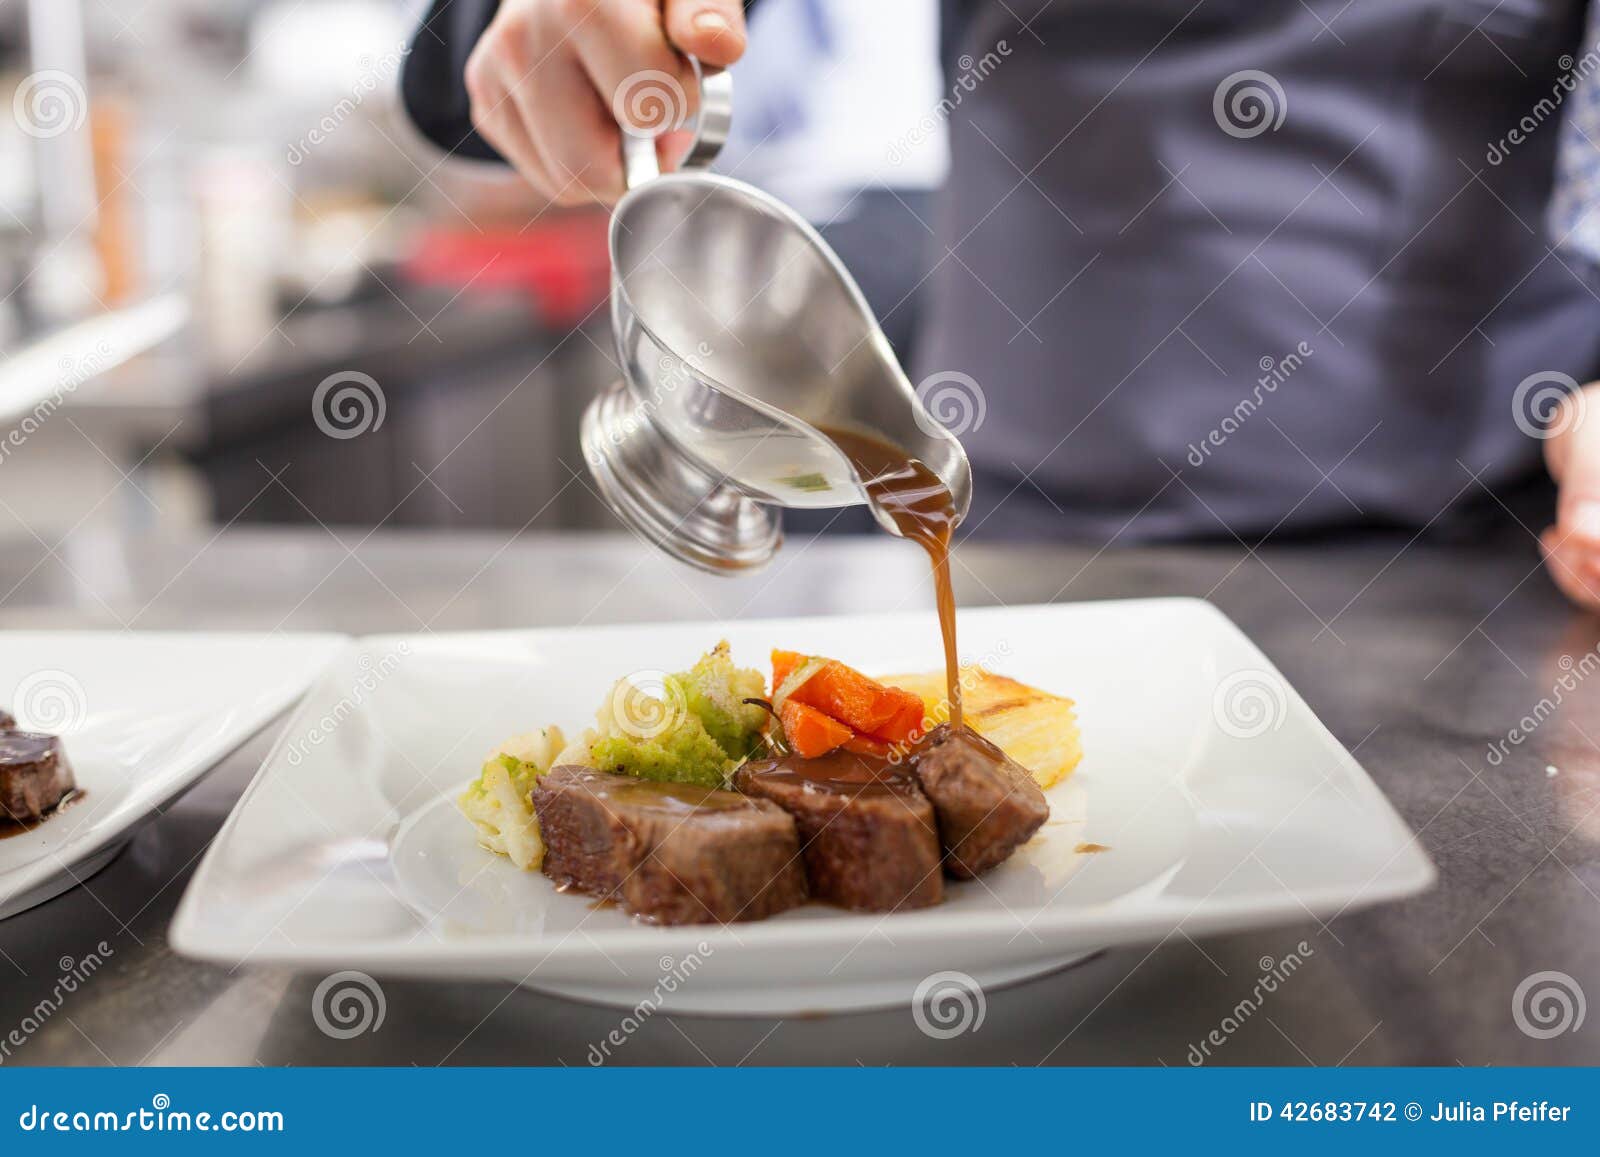 Chef Plating Up Food In A Restaurant Stock Photo - Image ...